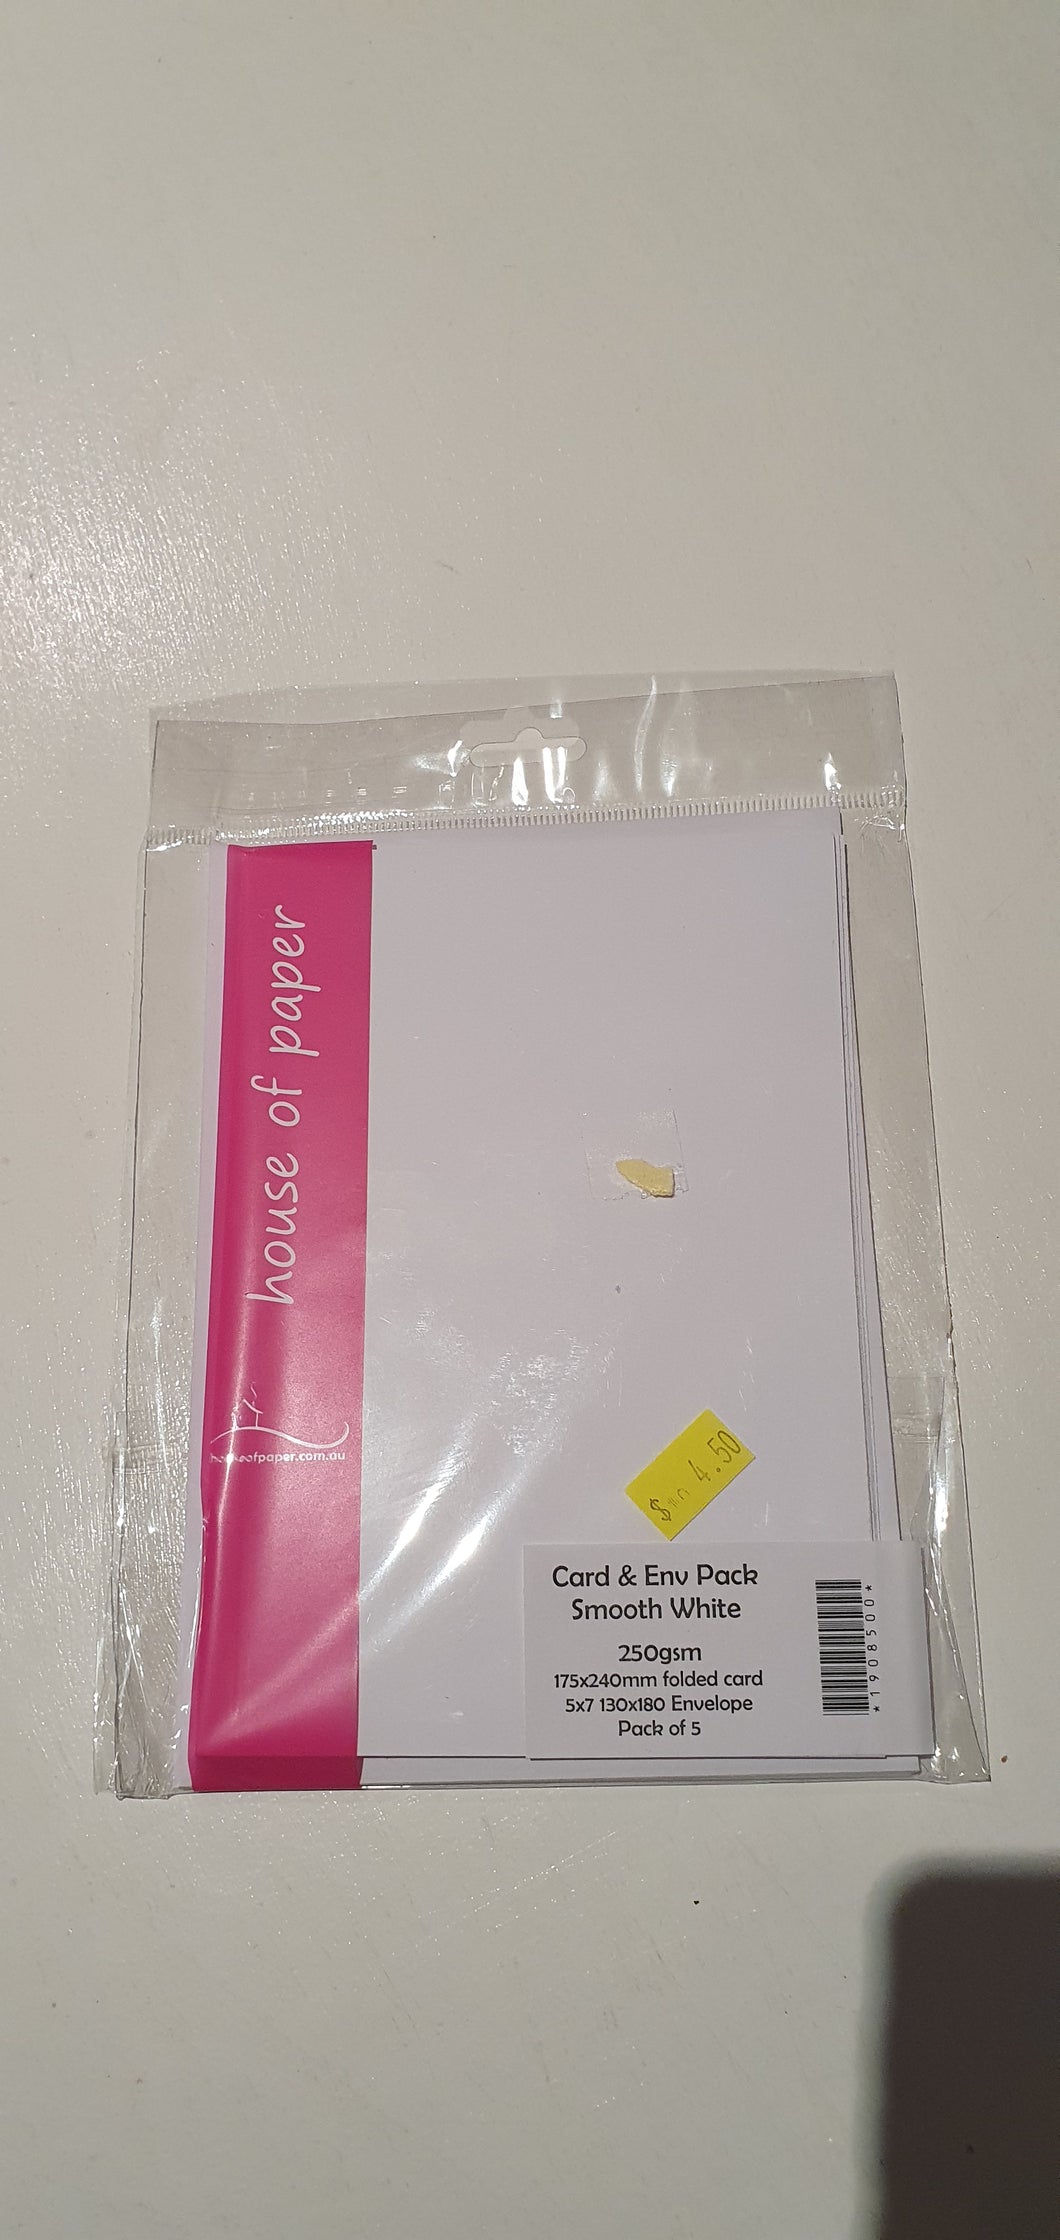 Card & Envelope Pack Smooth White 5 x 7 in